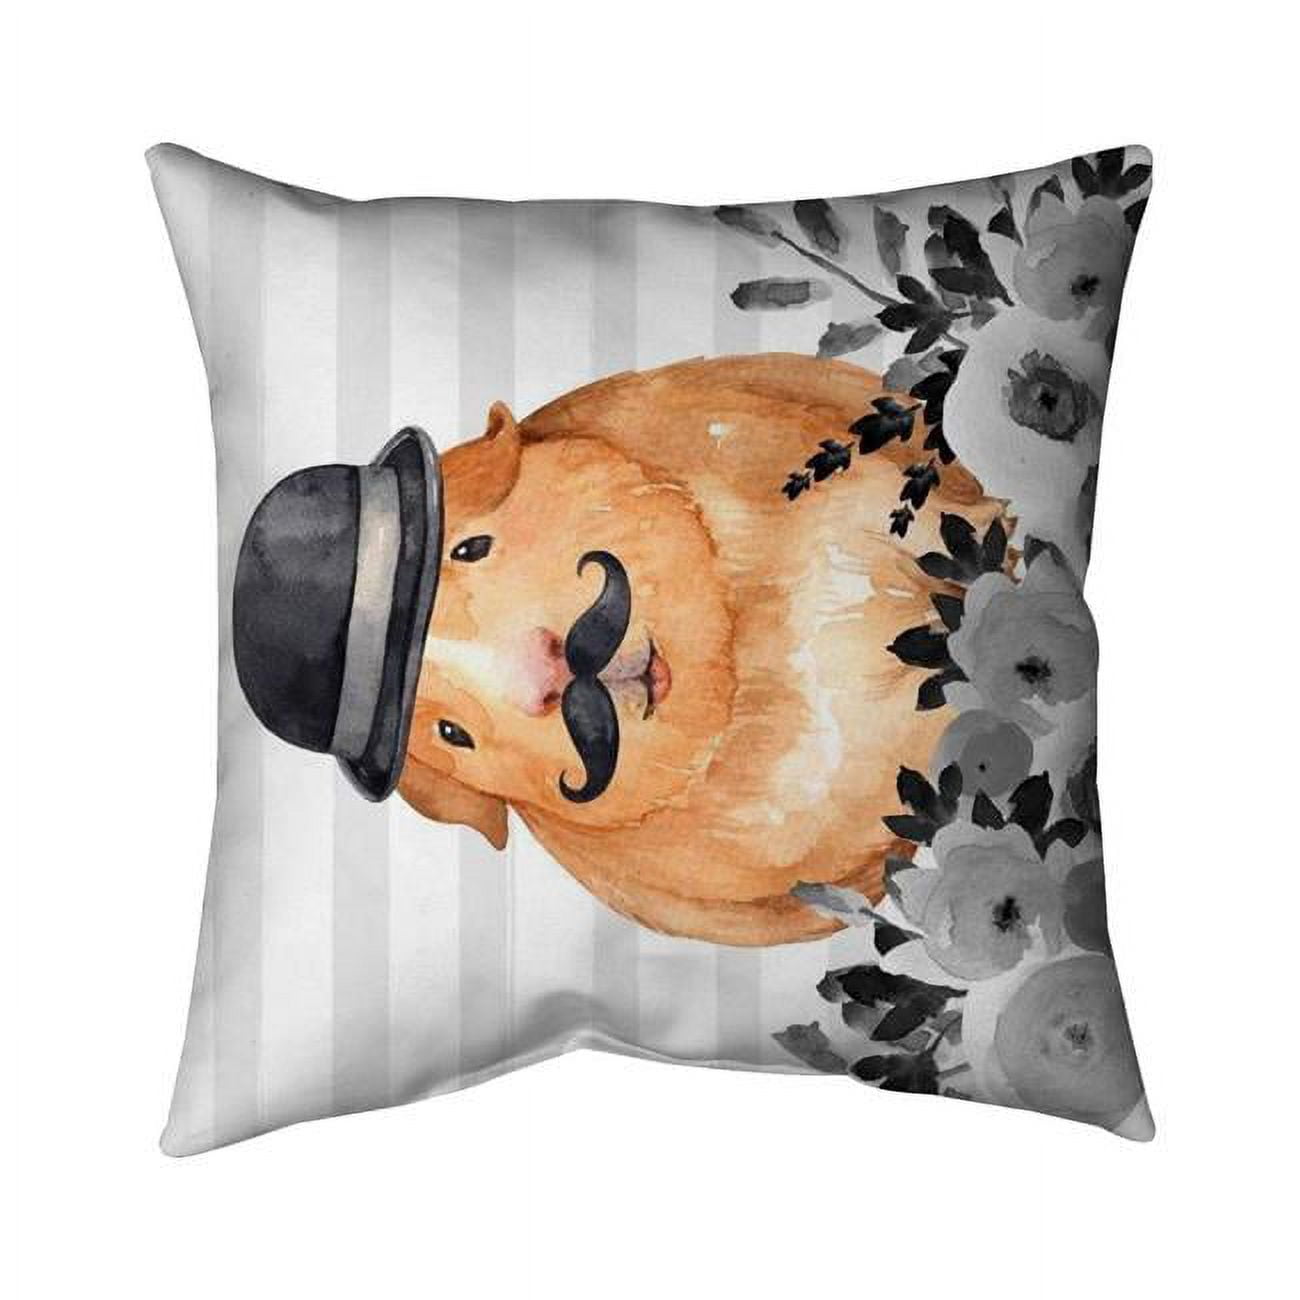 Begin Home Decor 5541-2020-CH6 20 x 20 in. Guinea Pig Detective-Double Sided Print Indoor Pillow